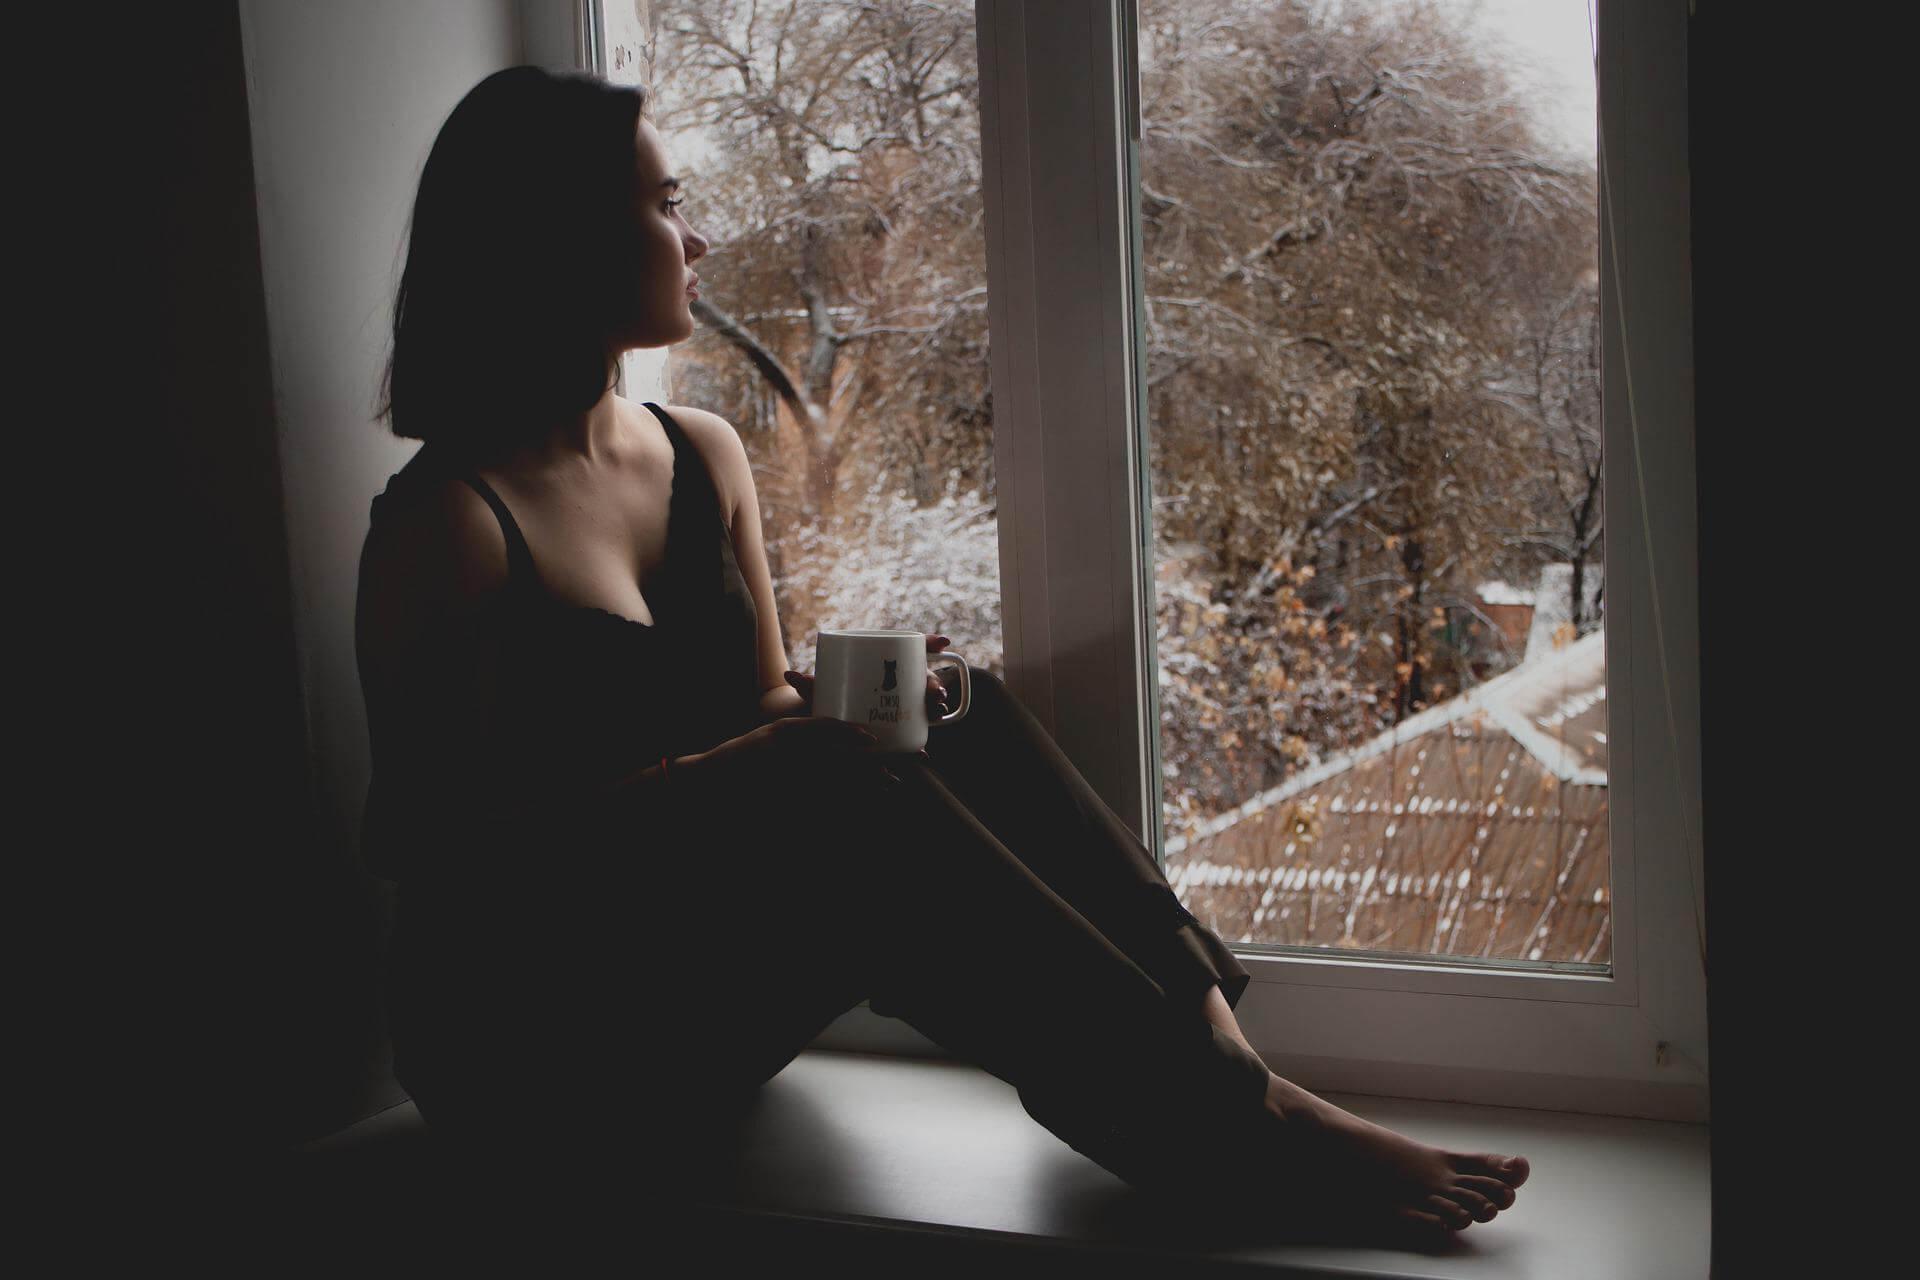 Girl in dark room looking out window - spouse suffering from addiction